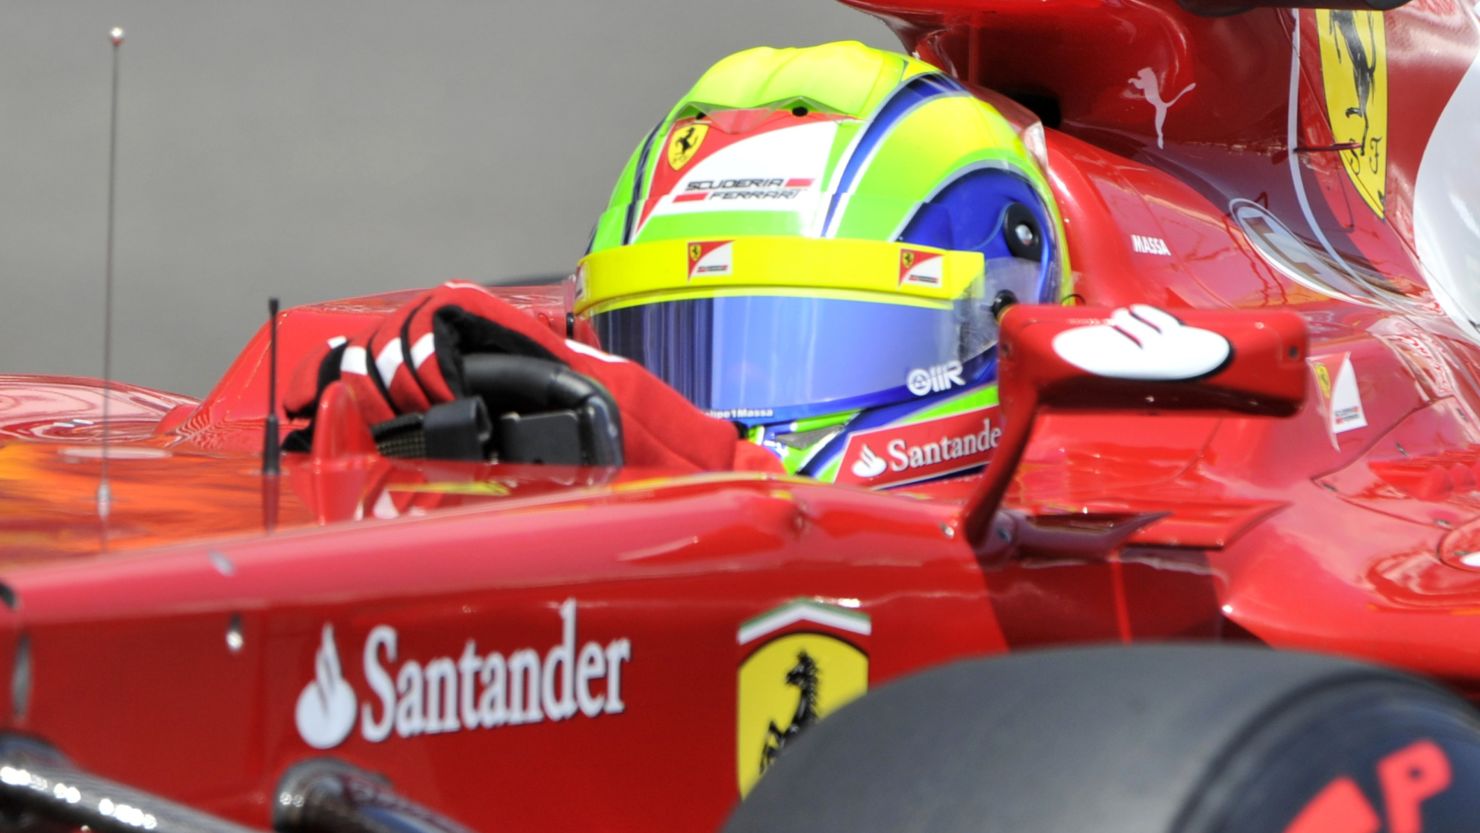 Massa has struggled for form after fracturing his skull during qualifying at the Hungary Grand Prix in 2009.